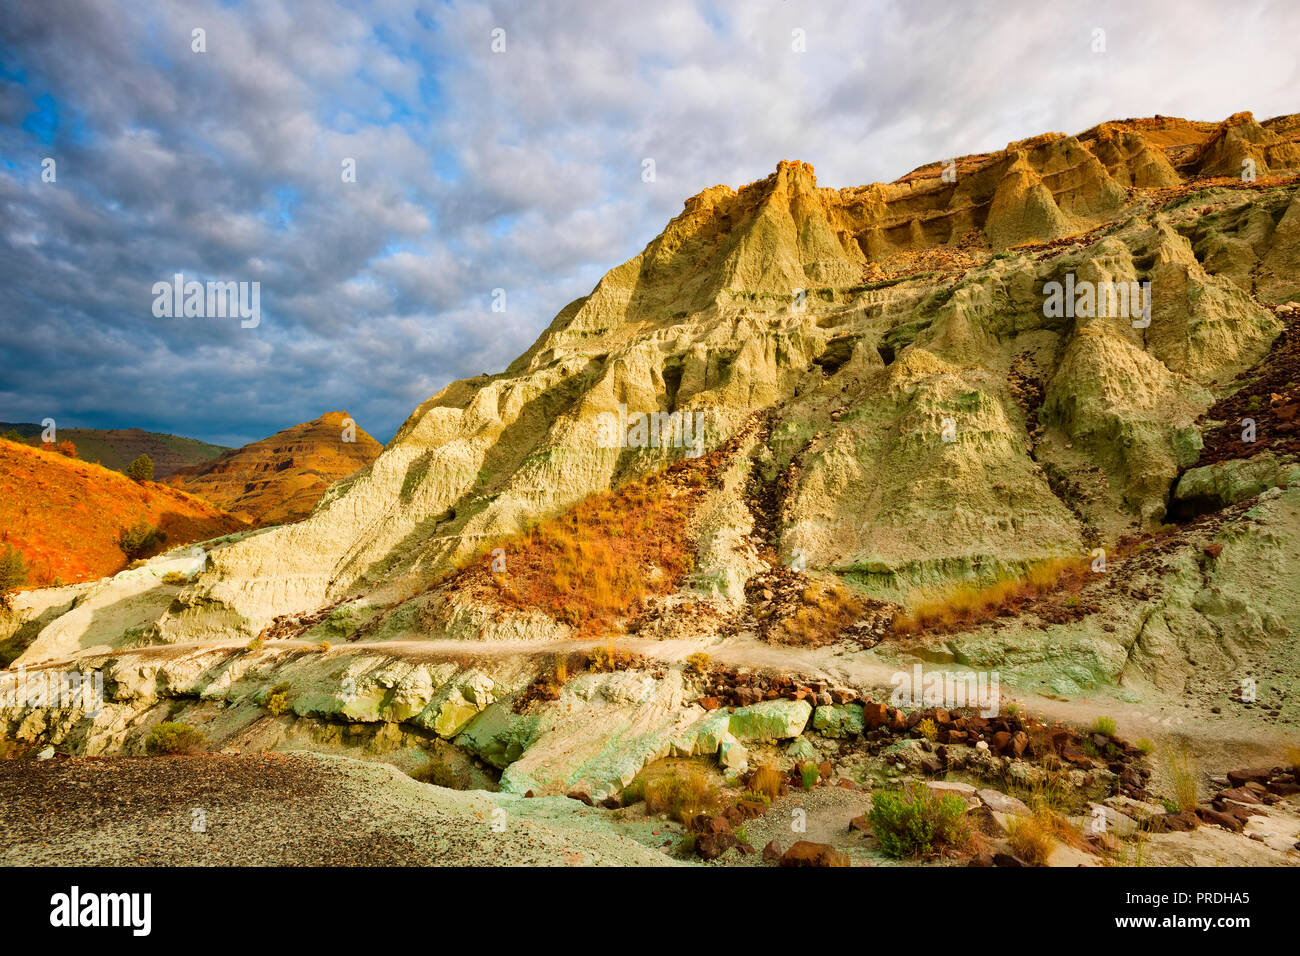 Early morning light in the Blue Basin in the Sheep Rock Unit of the John Day Fossil Beds National Monument near Kimberly, Oregon Stock Photo